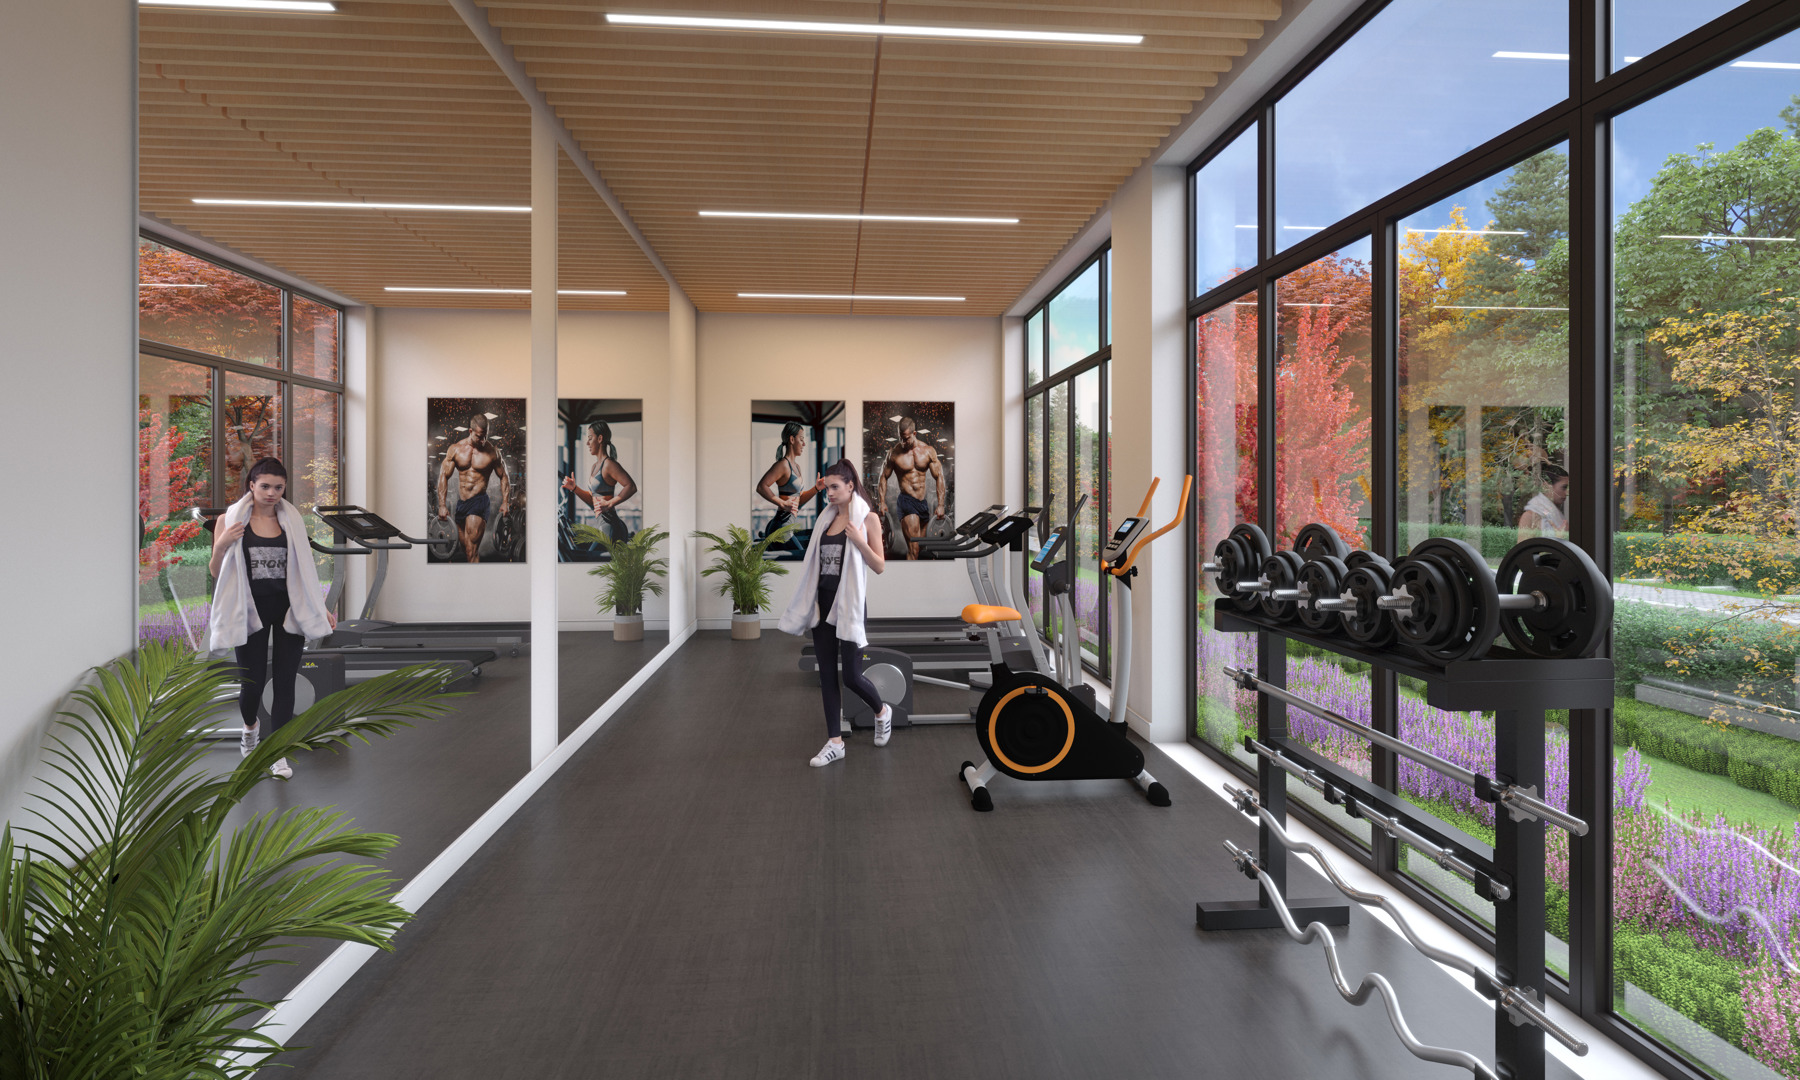 Amenities at The Anacapri - The Gym